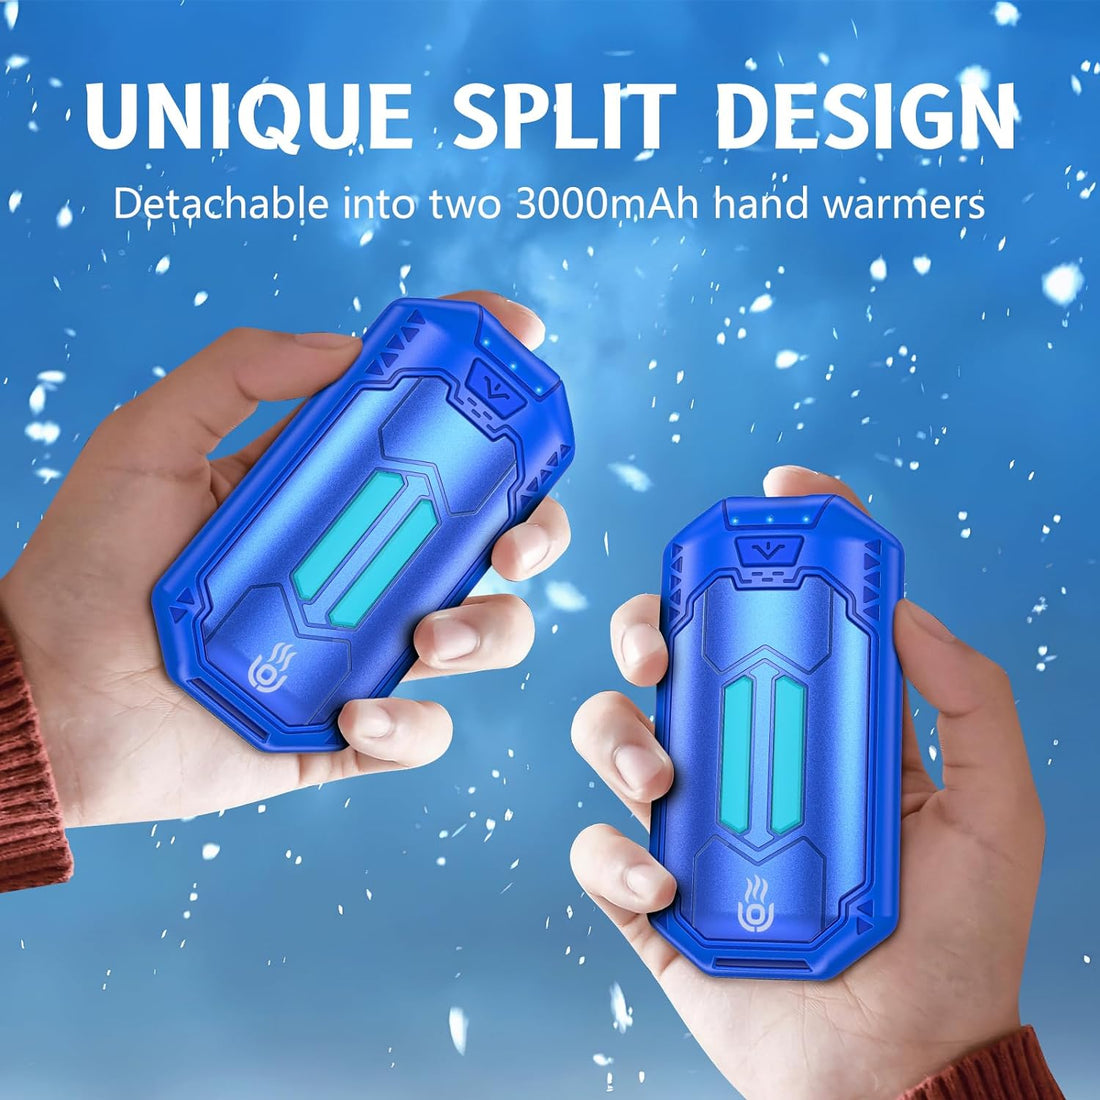 OUTJUT Hand Warmers Rechargeable 2 Pack 6000mAh Electric Portable Pocket Heater 20Hrs USB Reusable Hand Warmer with 3 Heating Modes for Fast Heating Outdoor Sports Gifts for Women Man (Dark Blue)